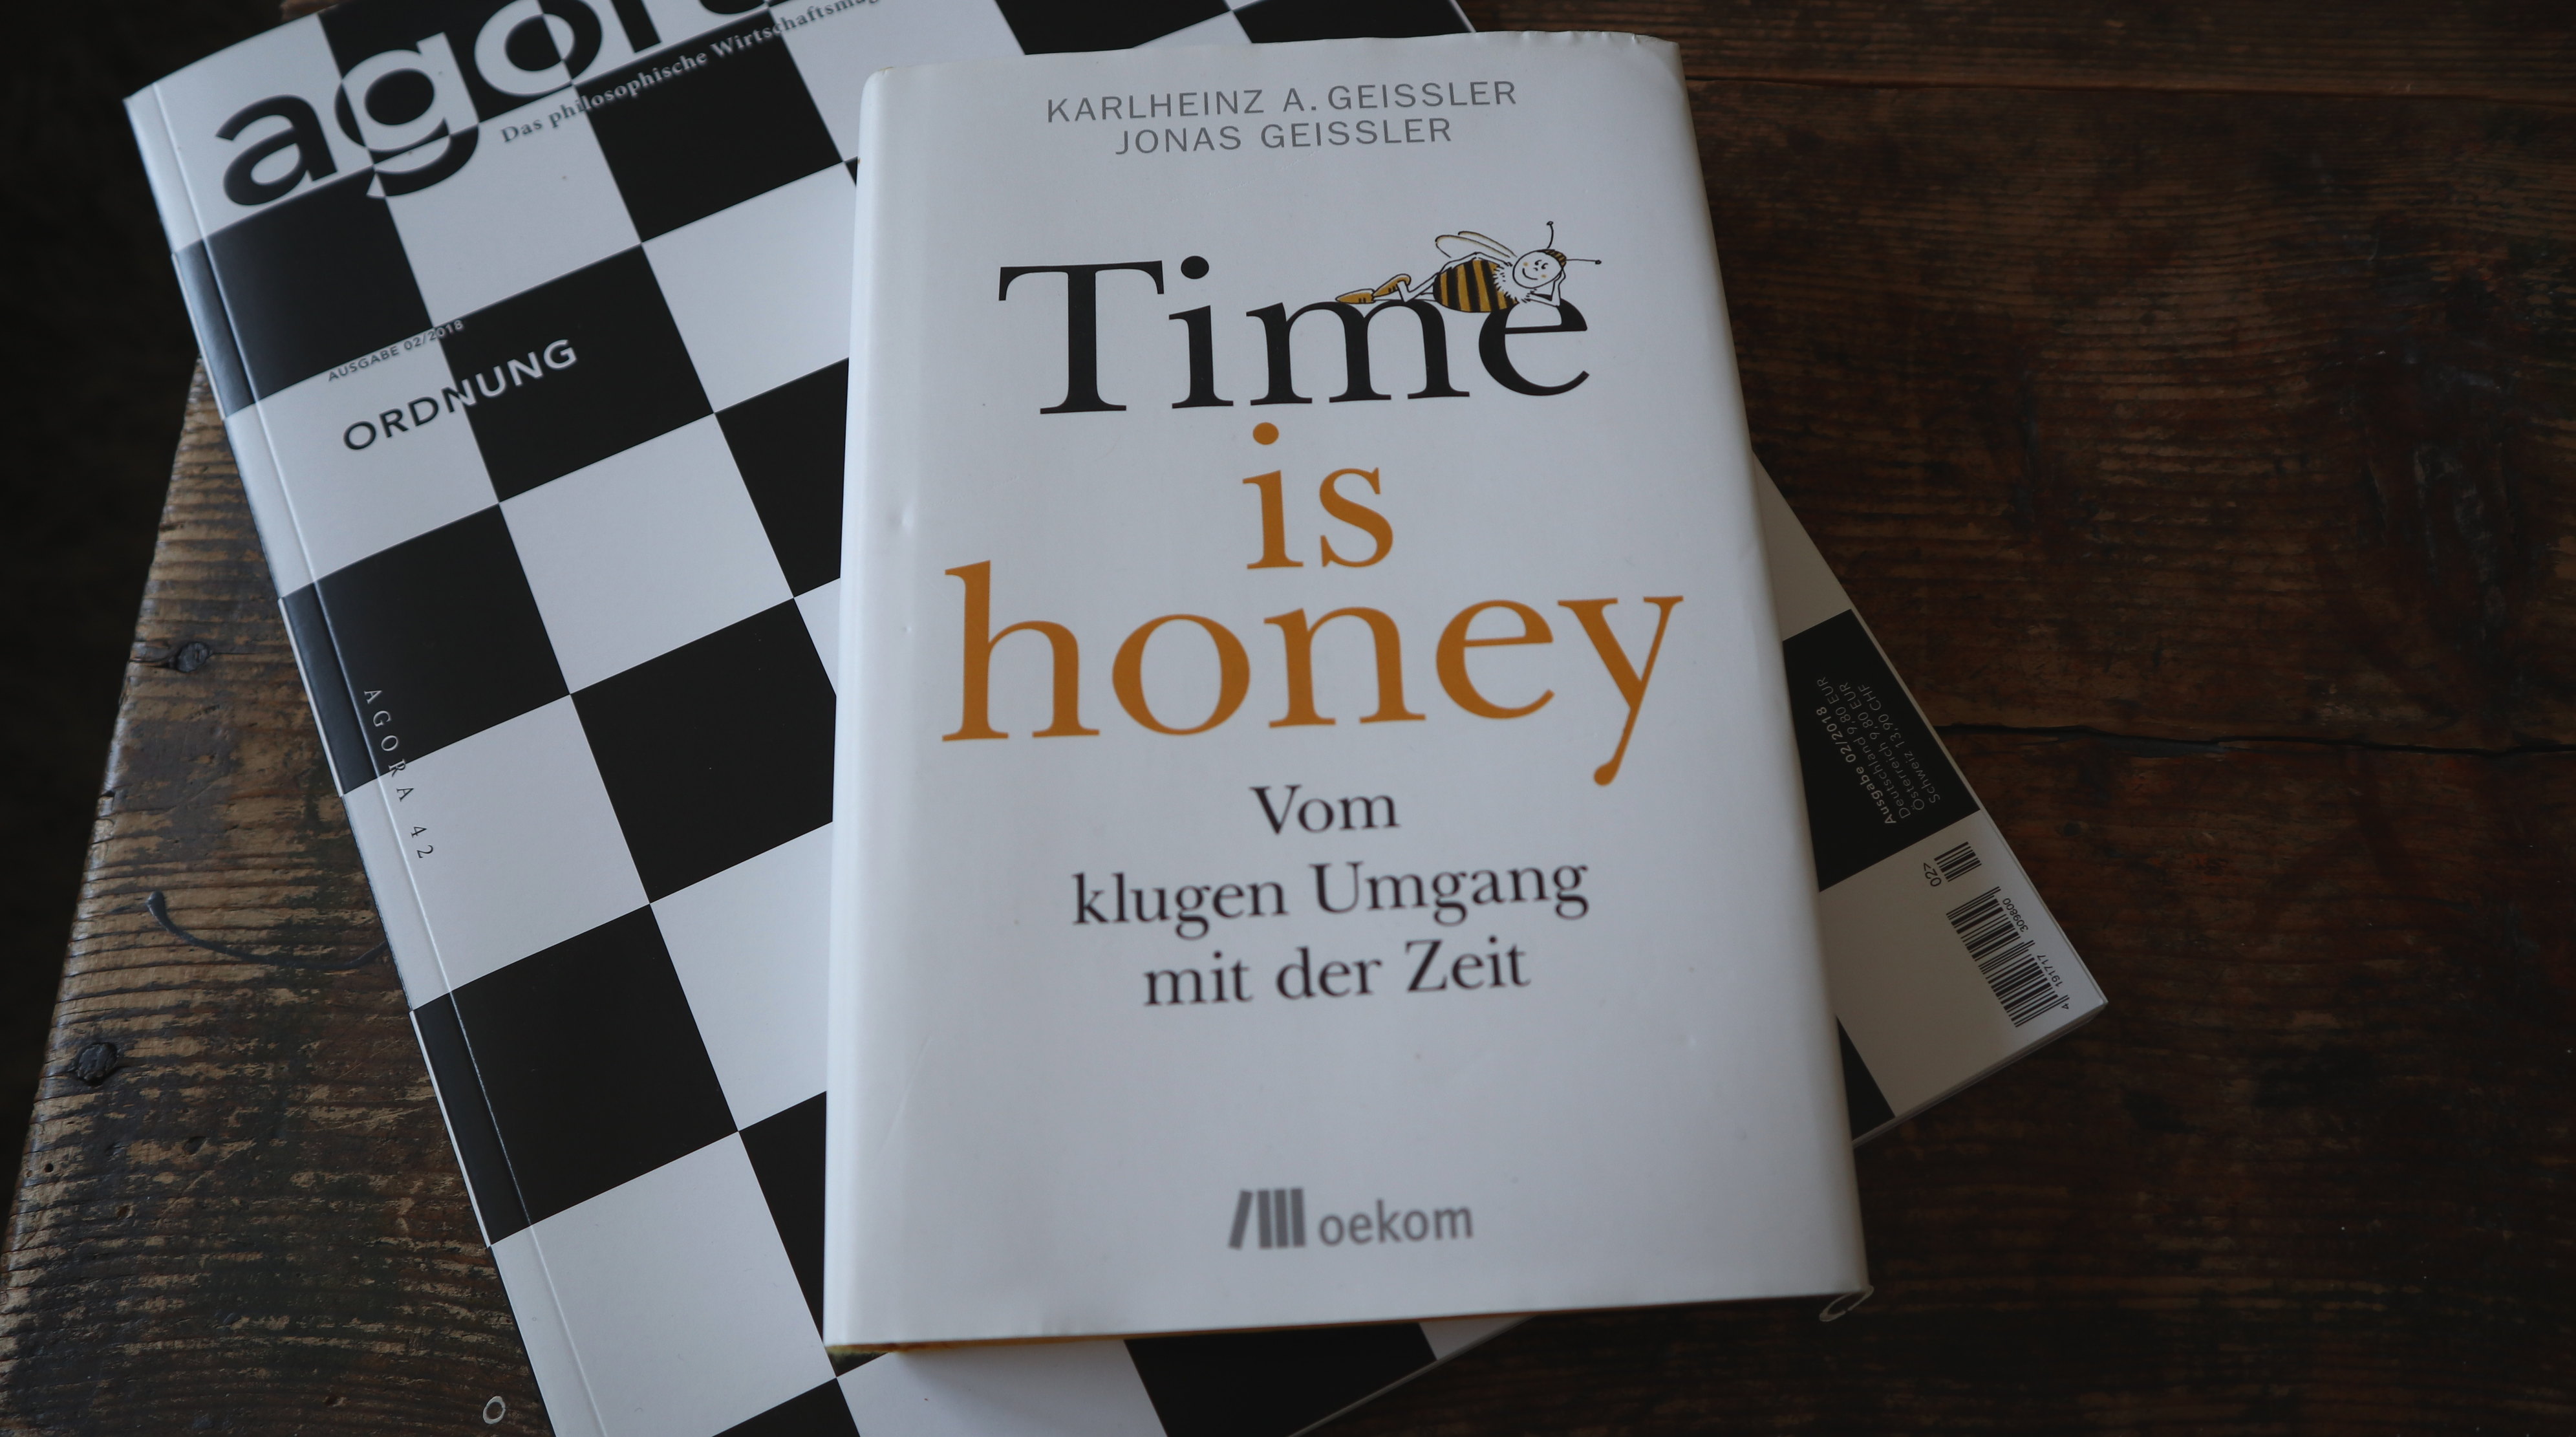 Time is Honey